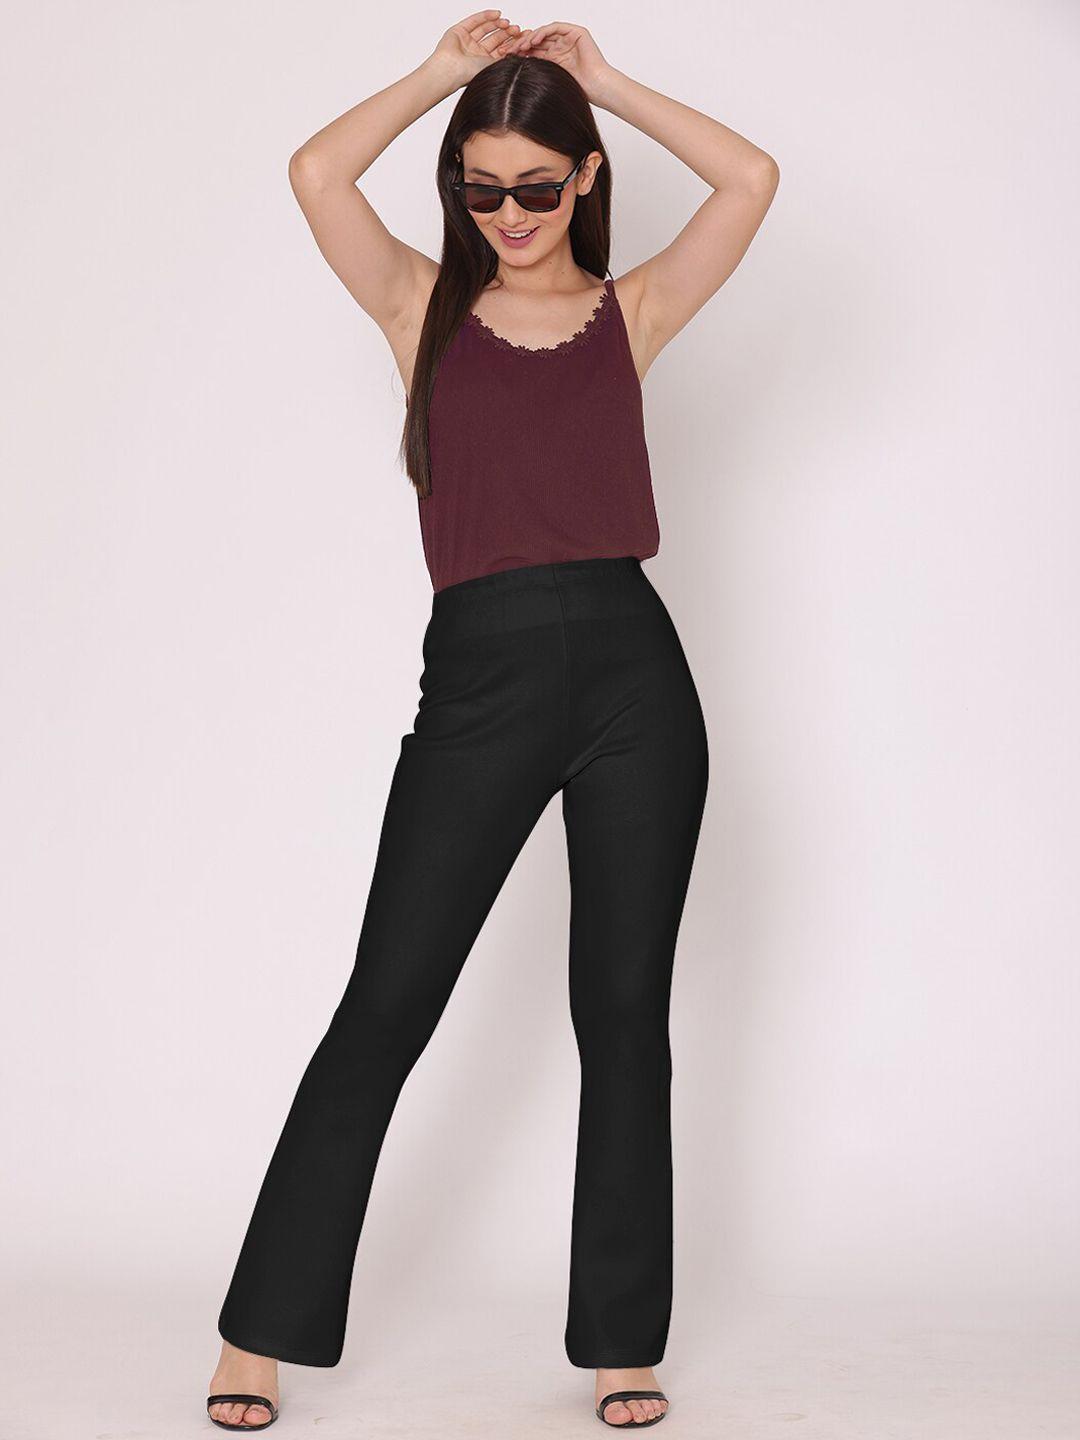 dressberry women high-rise trousers